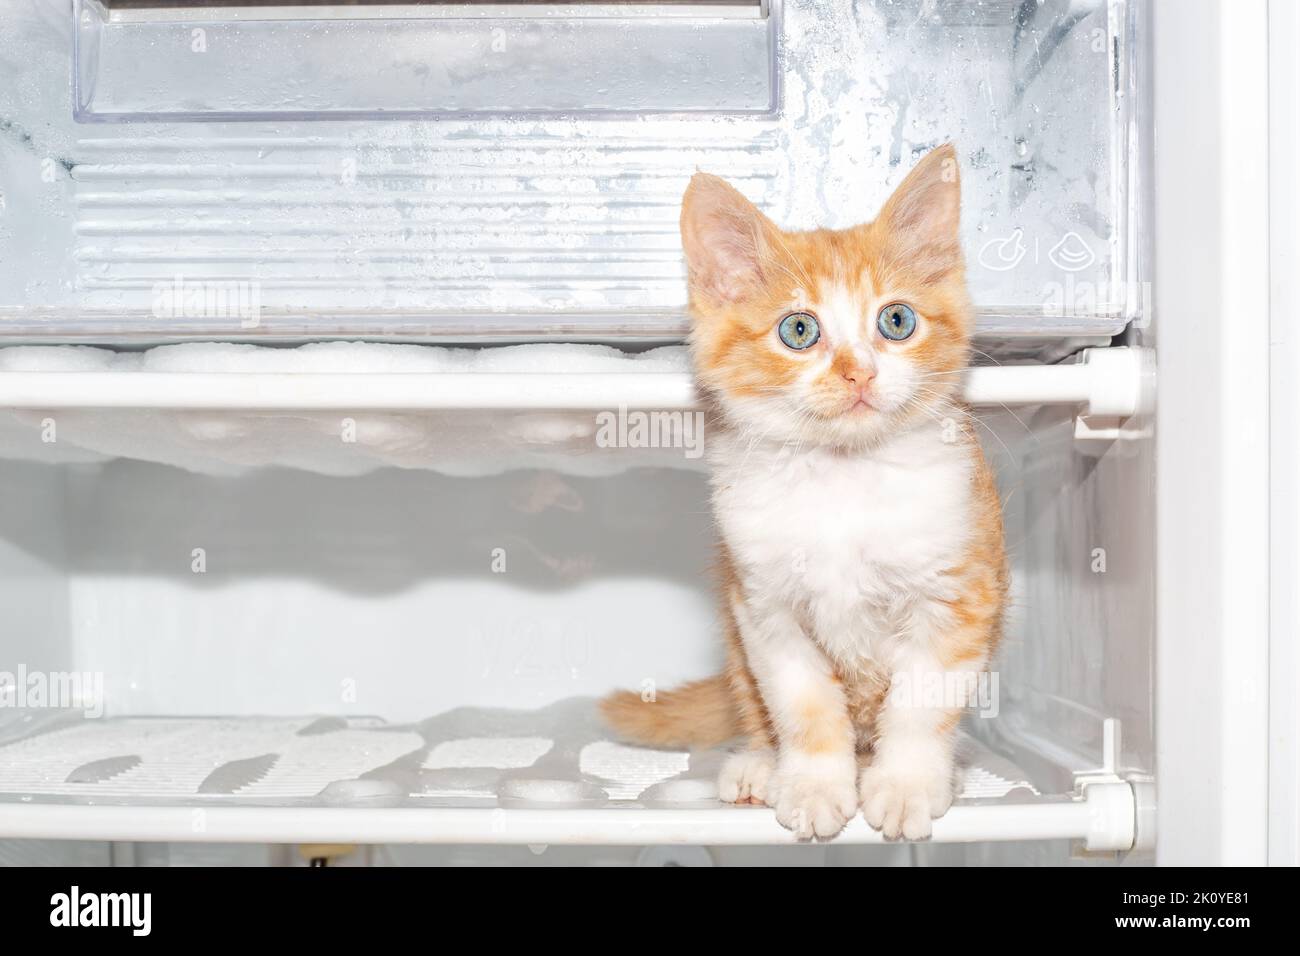 The freezer is defrosting. A red kitten sits on a shelf in the refrigerator. Maintenance of household appliances. Stock Photo